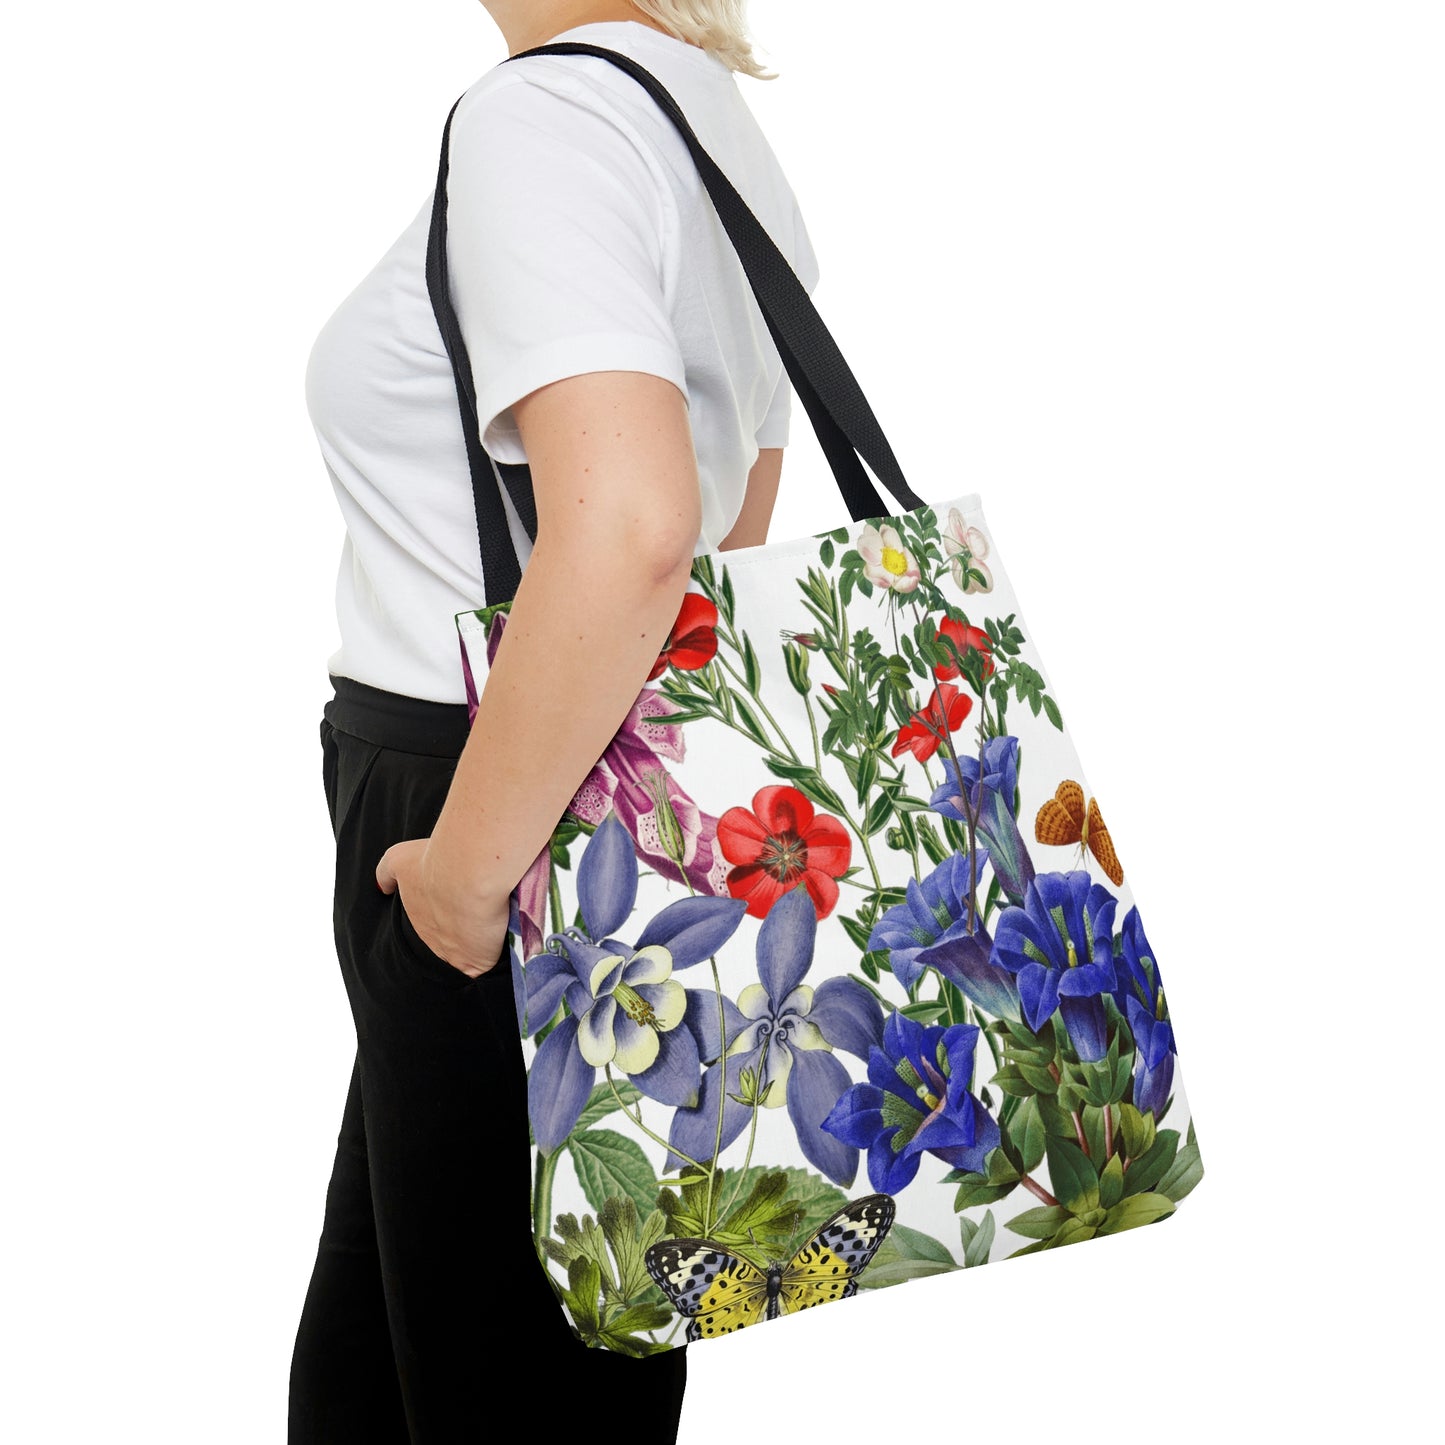 High Quality, All-Over Print Tote Bag, Flowers, Wildflowers, Flowers, Cottagecore, Garden, Foxglove, Wild Rose, Petunias